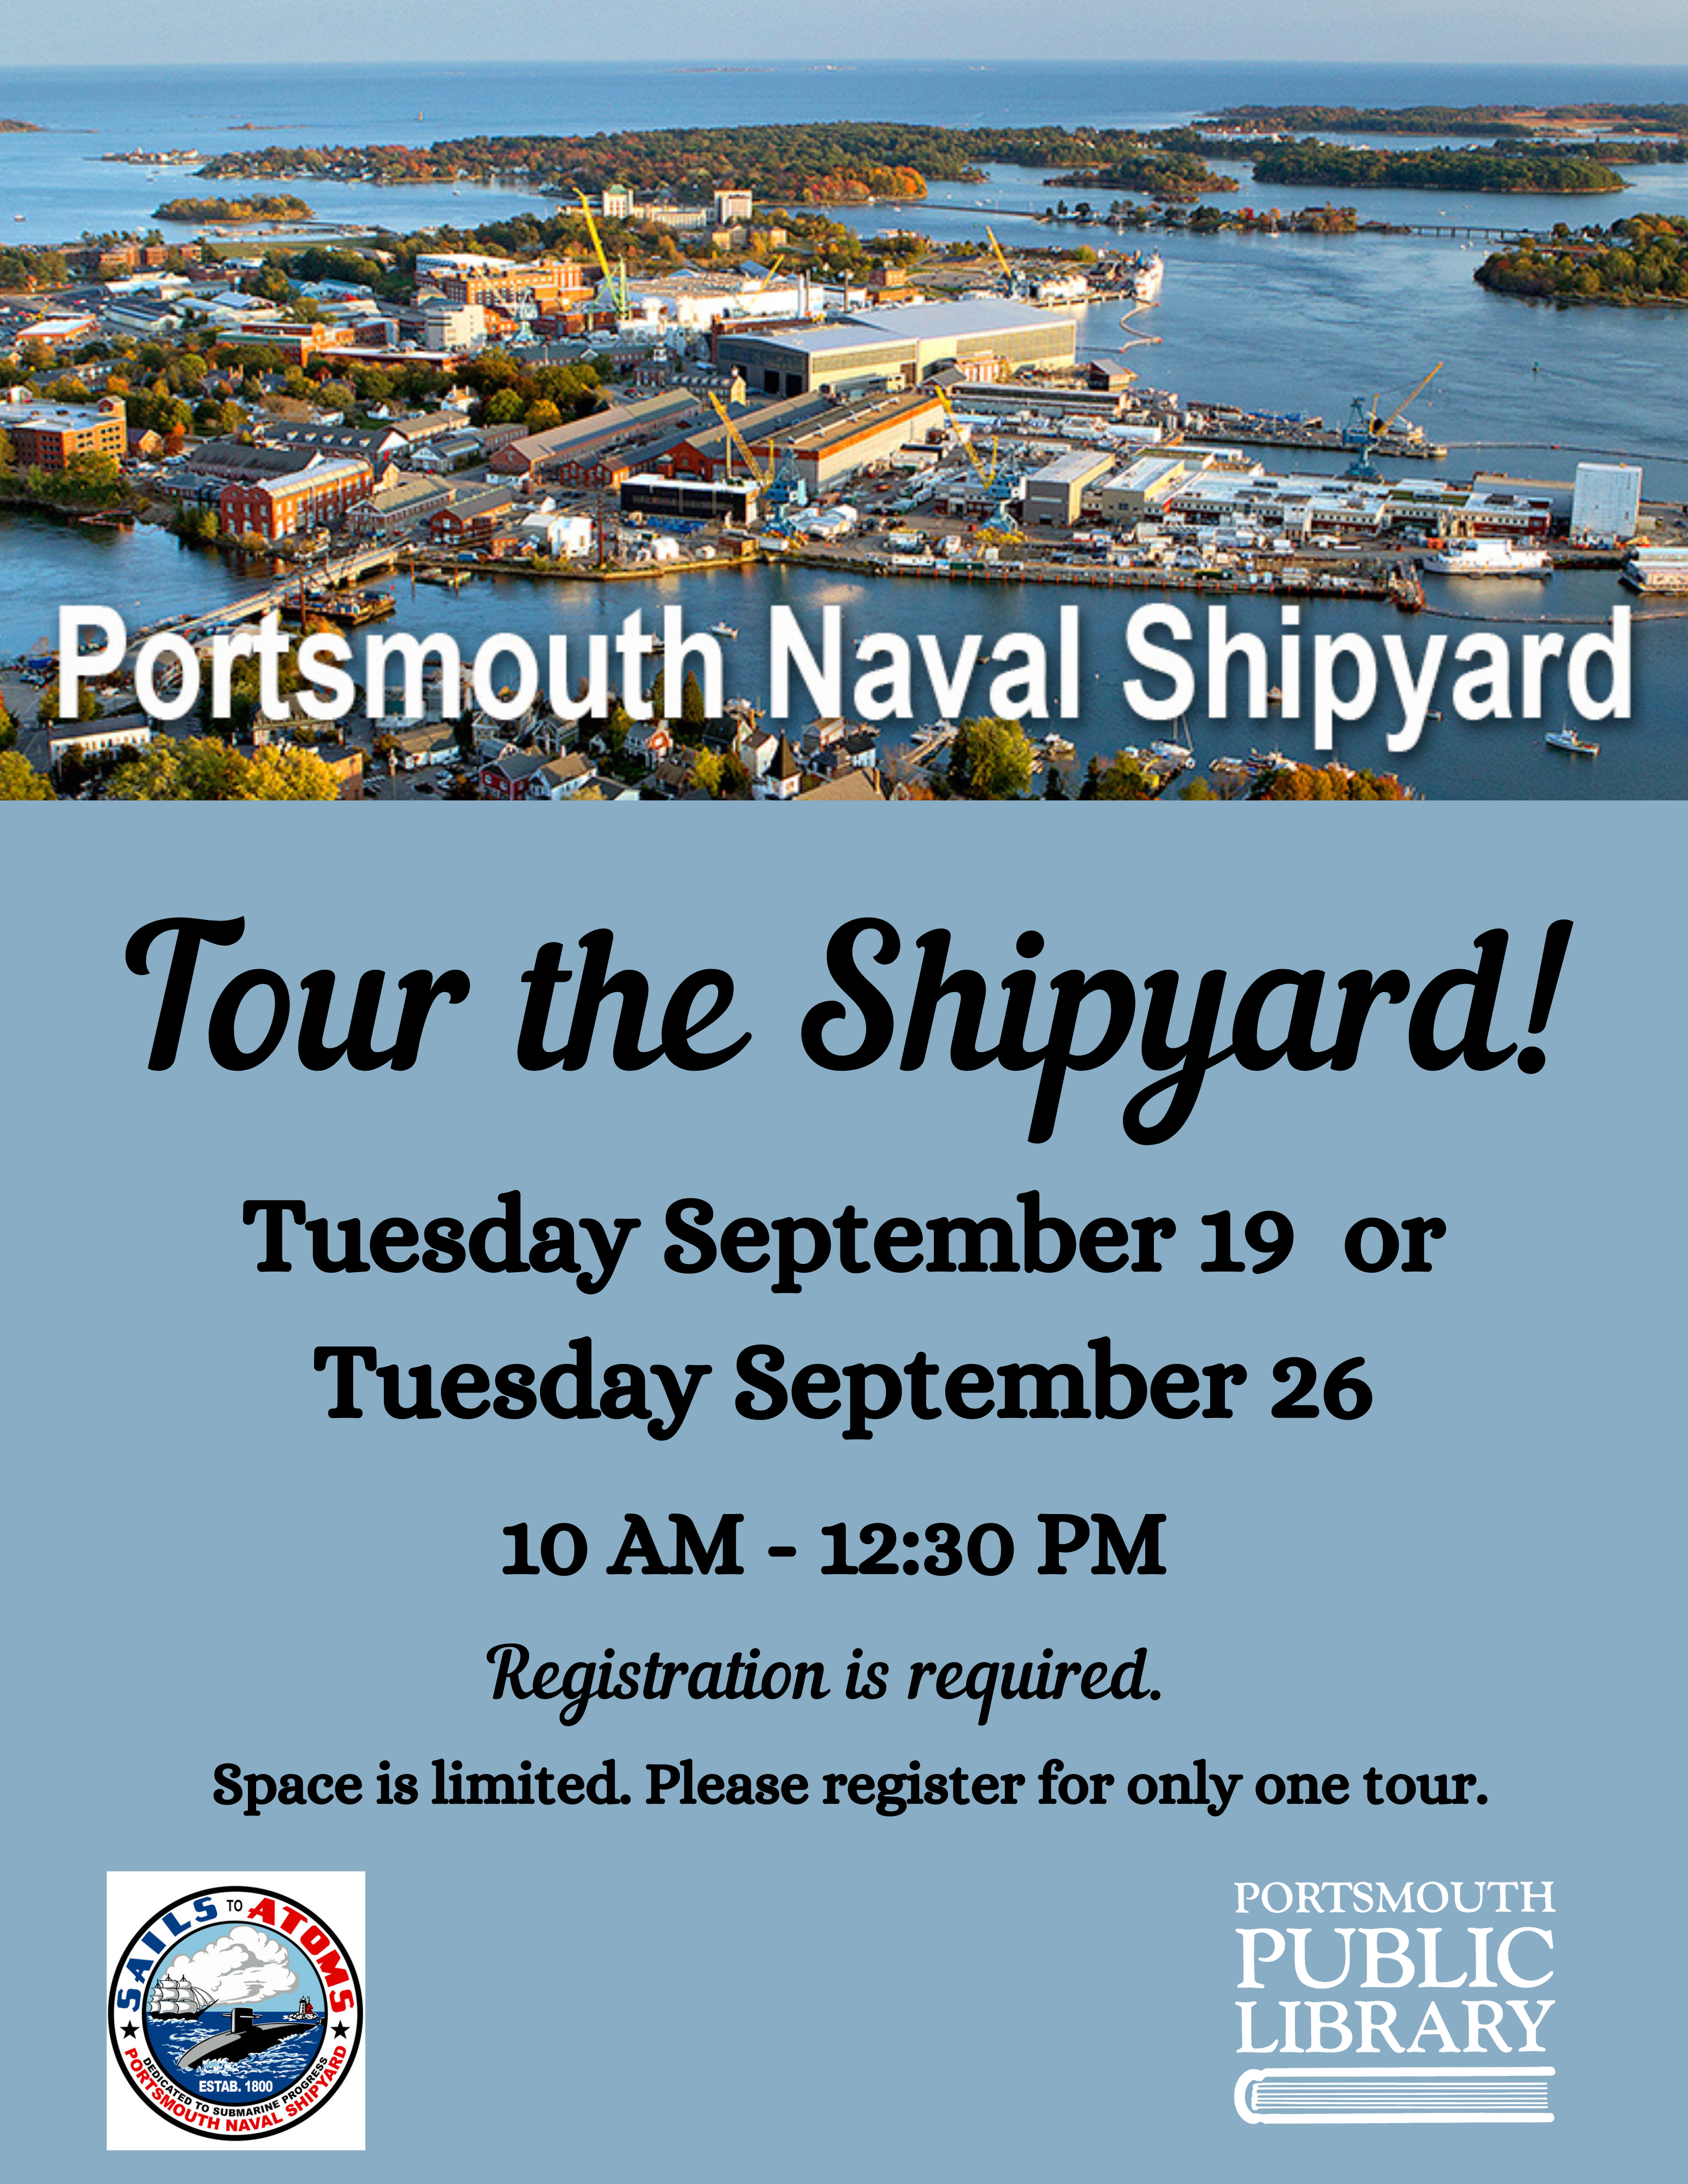 Portsmouth Naval Shipyard Tour the Shipyard Tuesday September 19 or 26. Two tours only  sign up for one.  From 10 AM-12:30 PM..or 3-5 PM